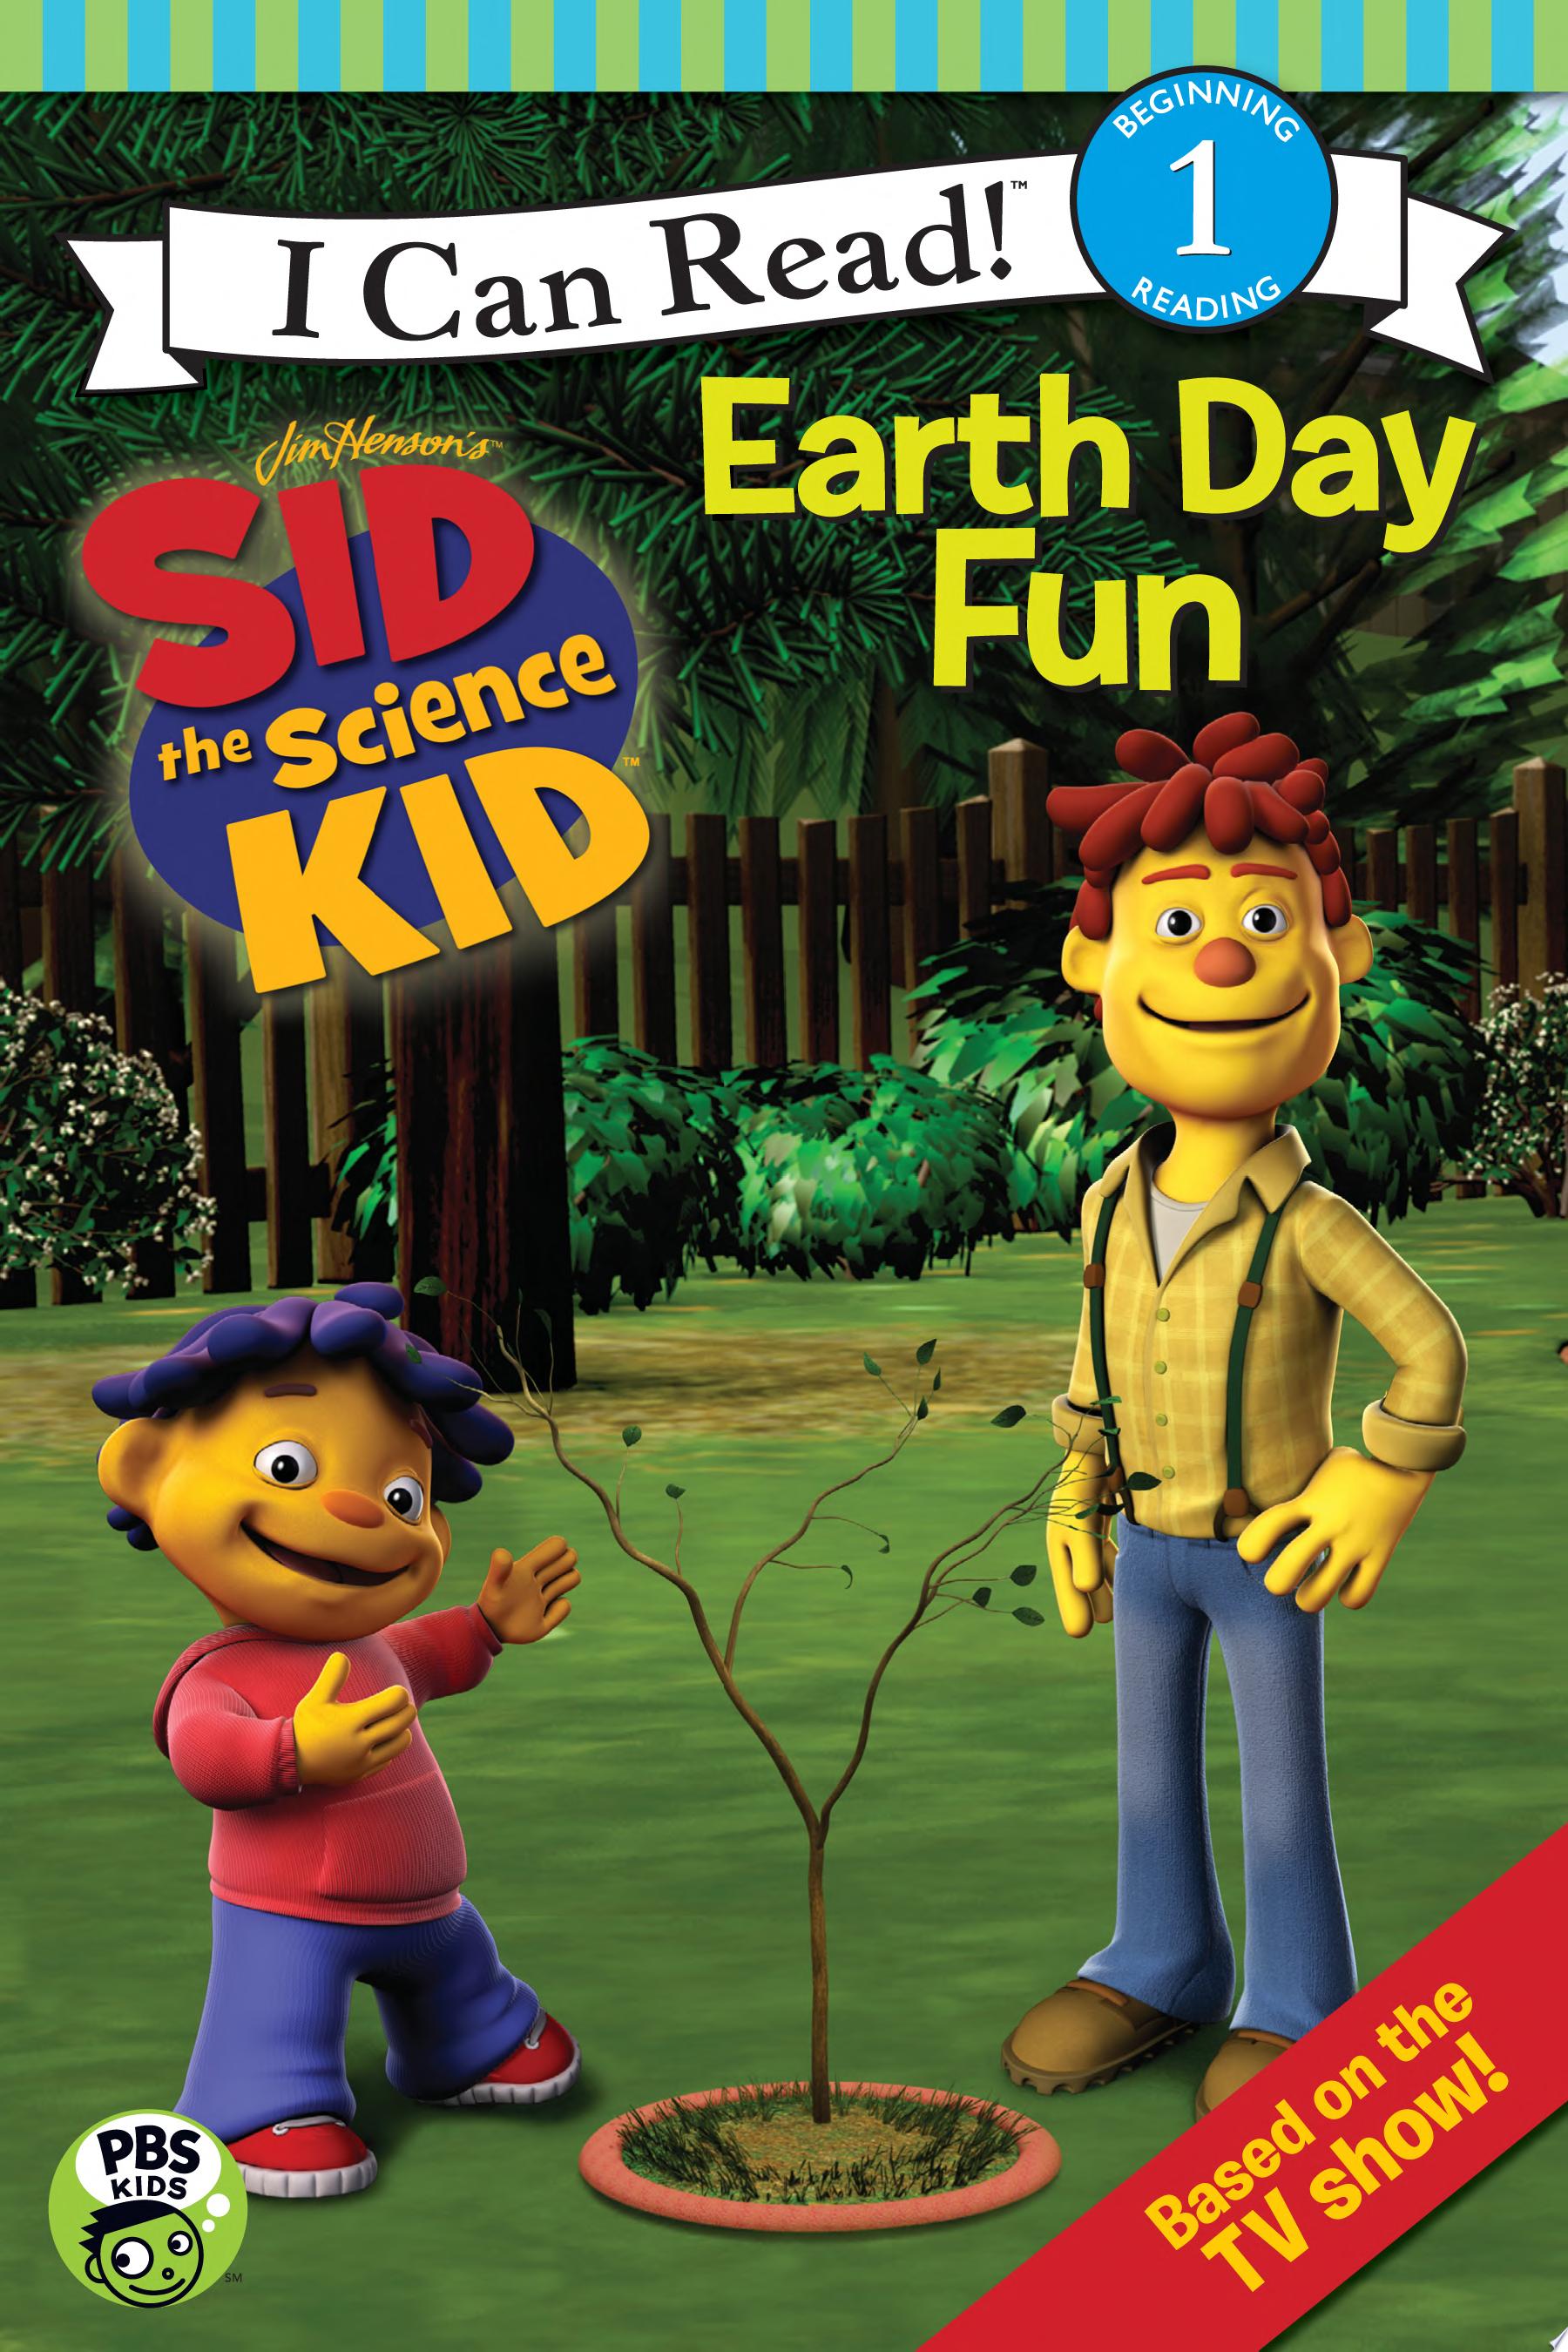 Image for "Sid the Science Kid: Earth Day Fun"